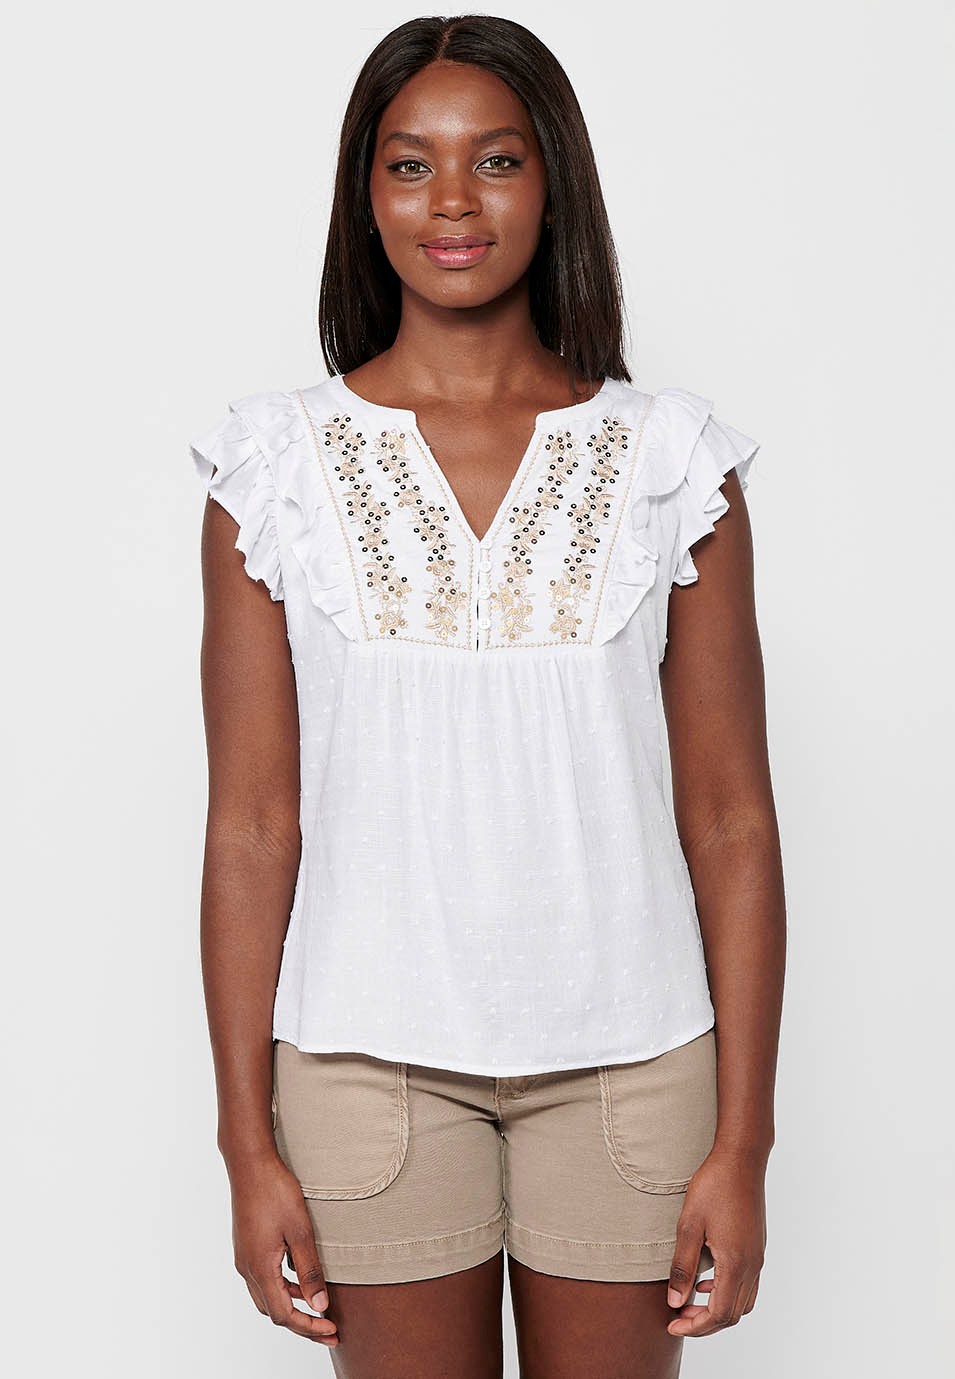 Blouse with short sleeve ruffle with front embroidery detail in White for Women